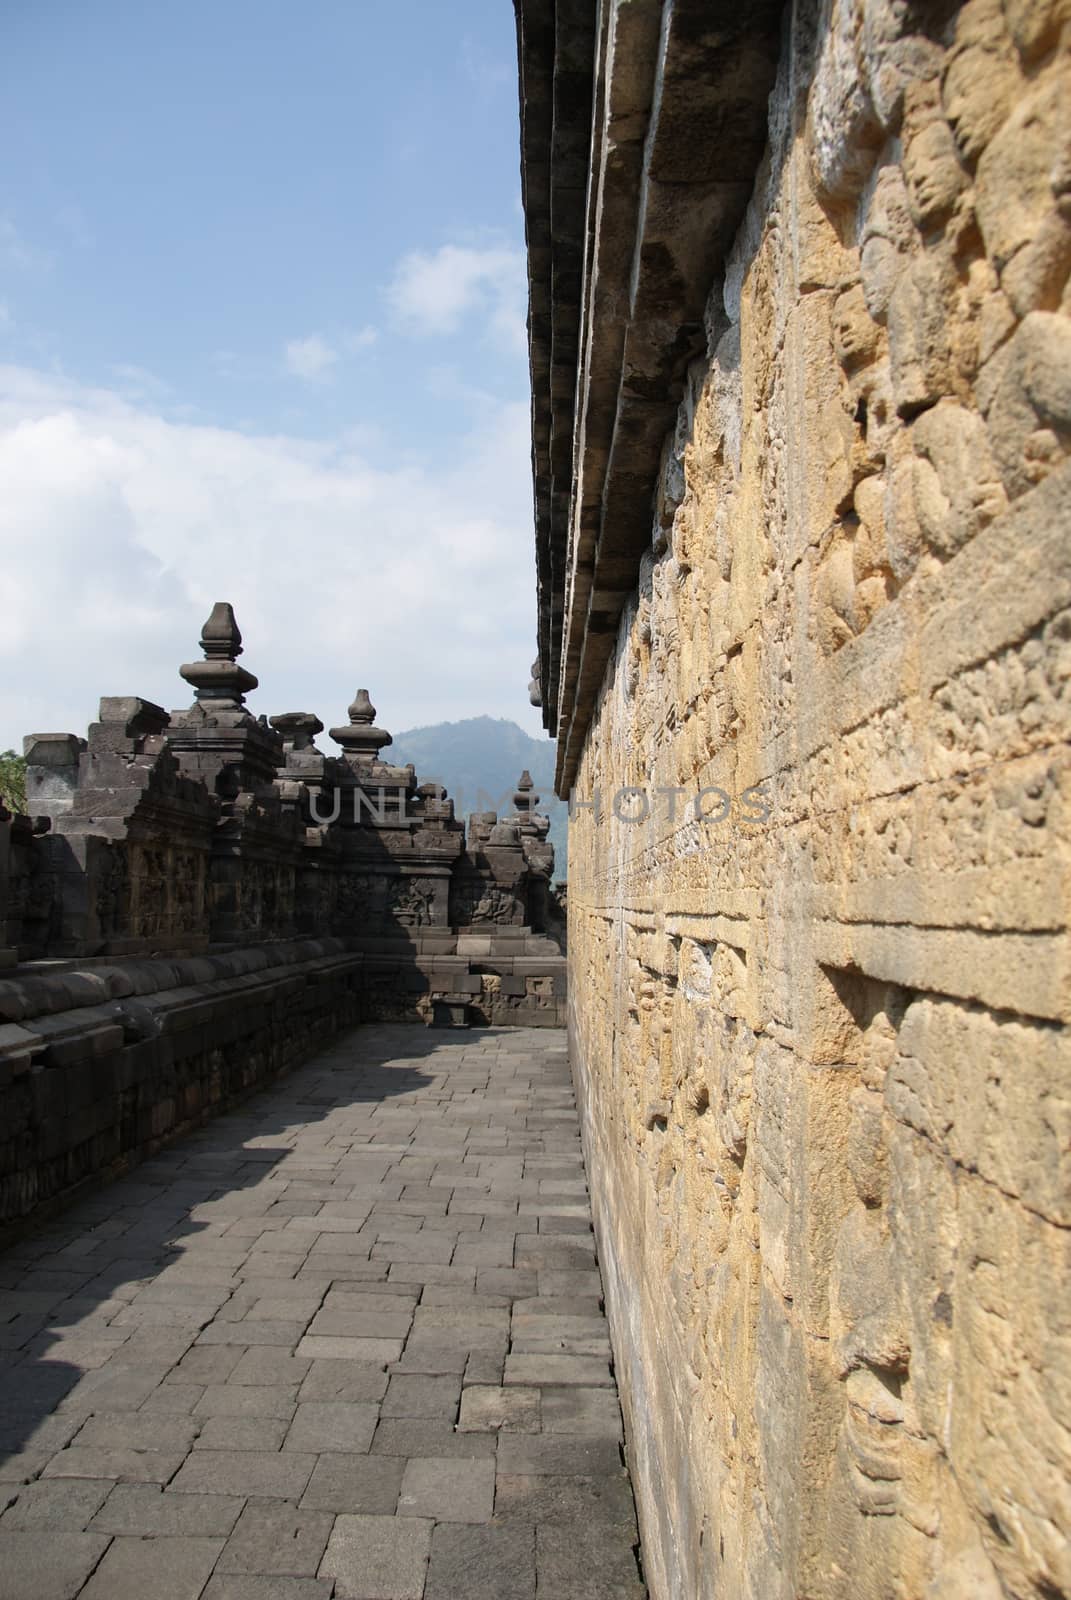 Relief or carvings on the wall of Borobudur Temple in Jogjakarta, Indonesia by craigansibin